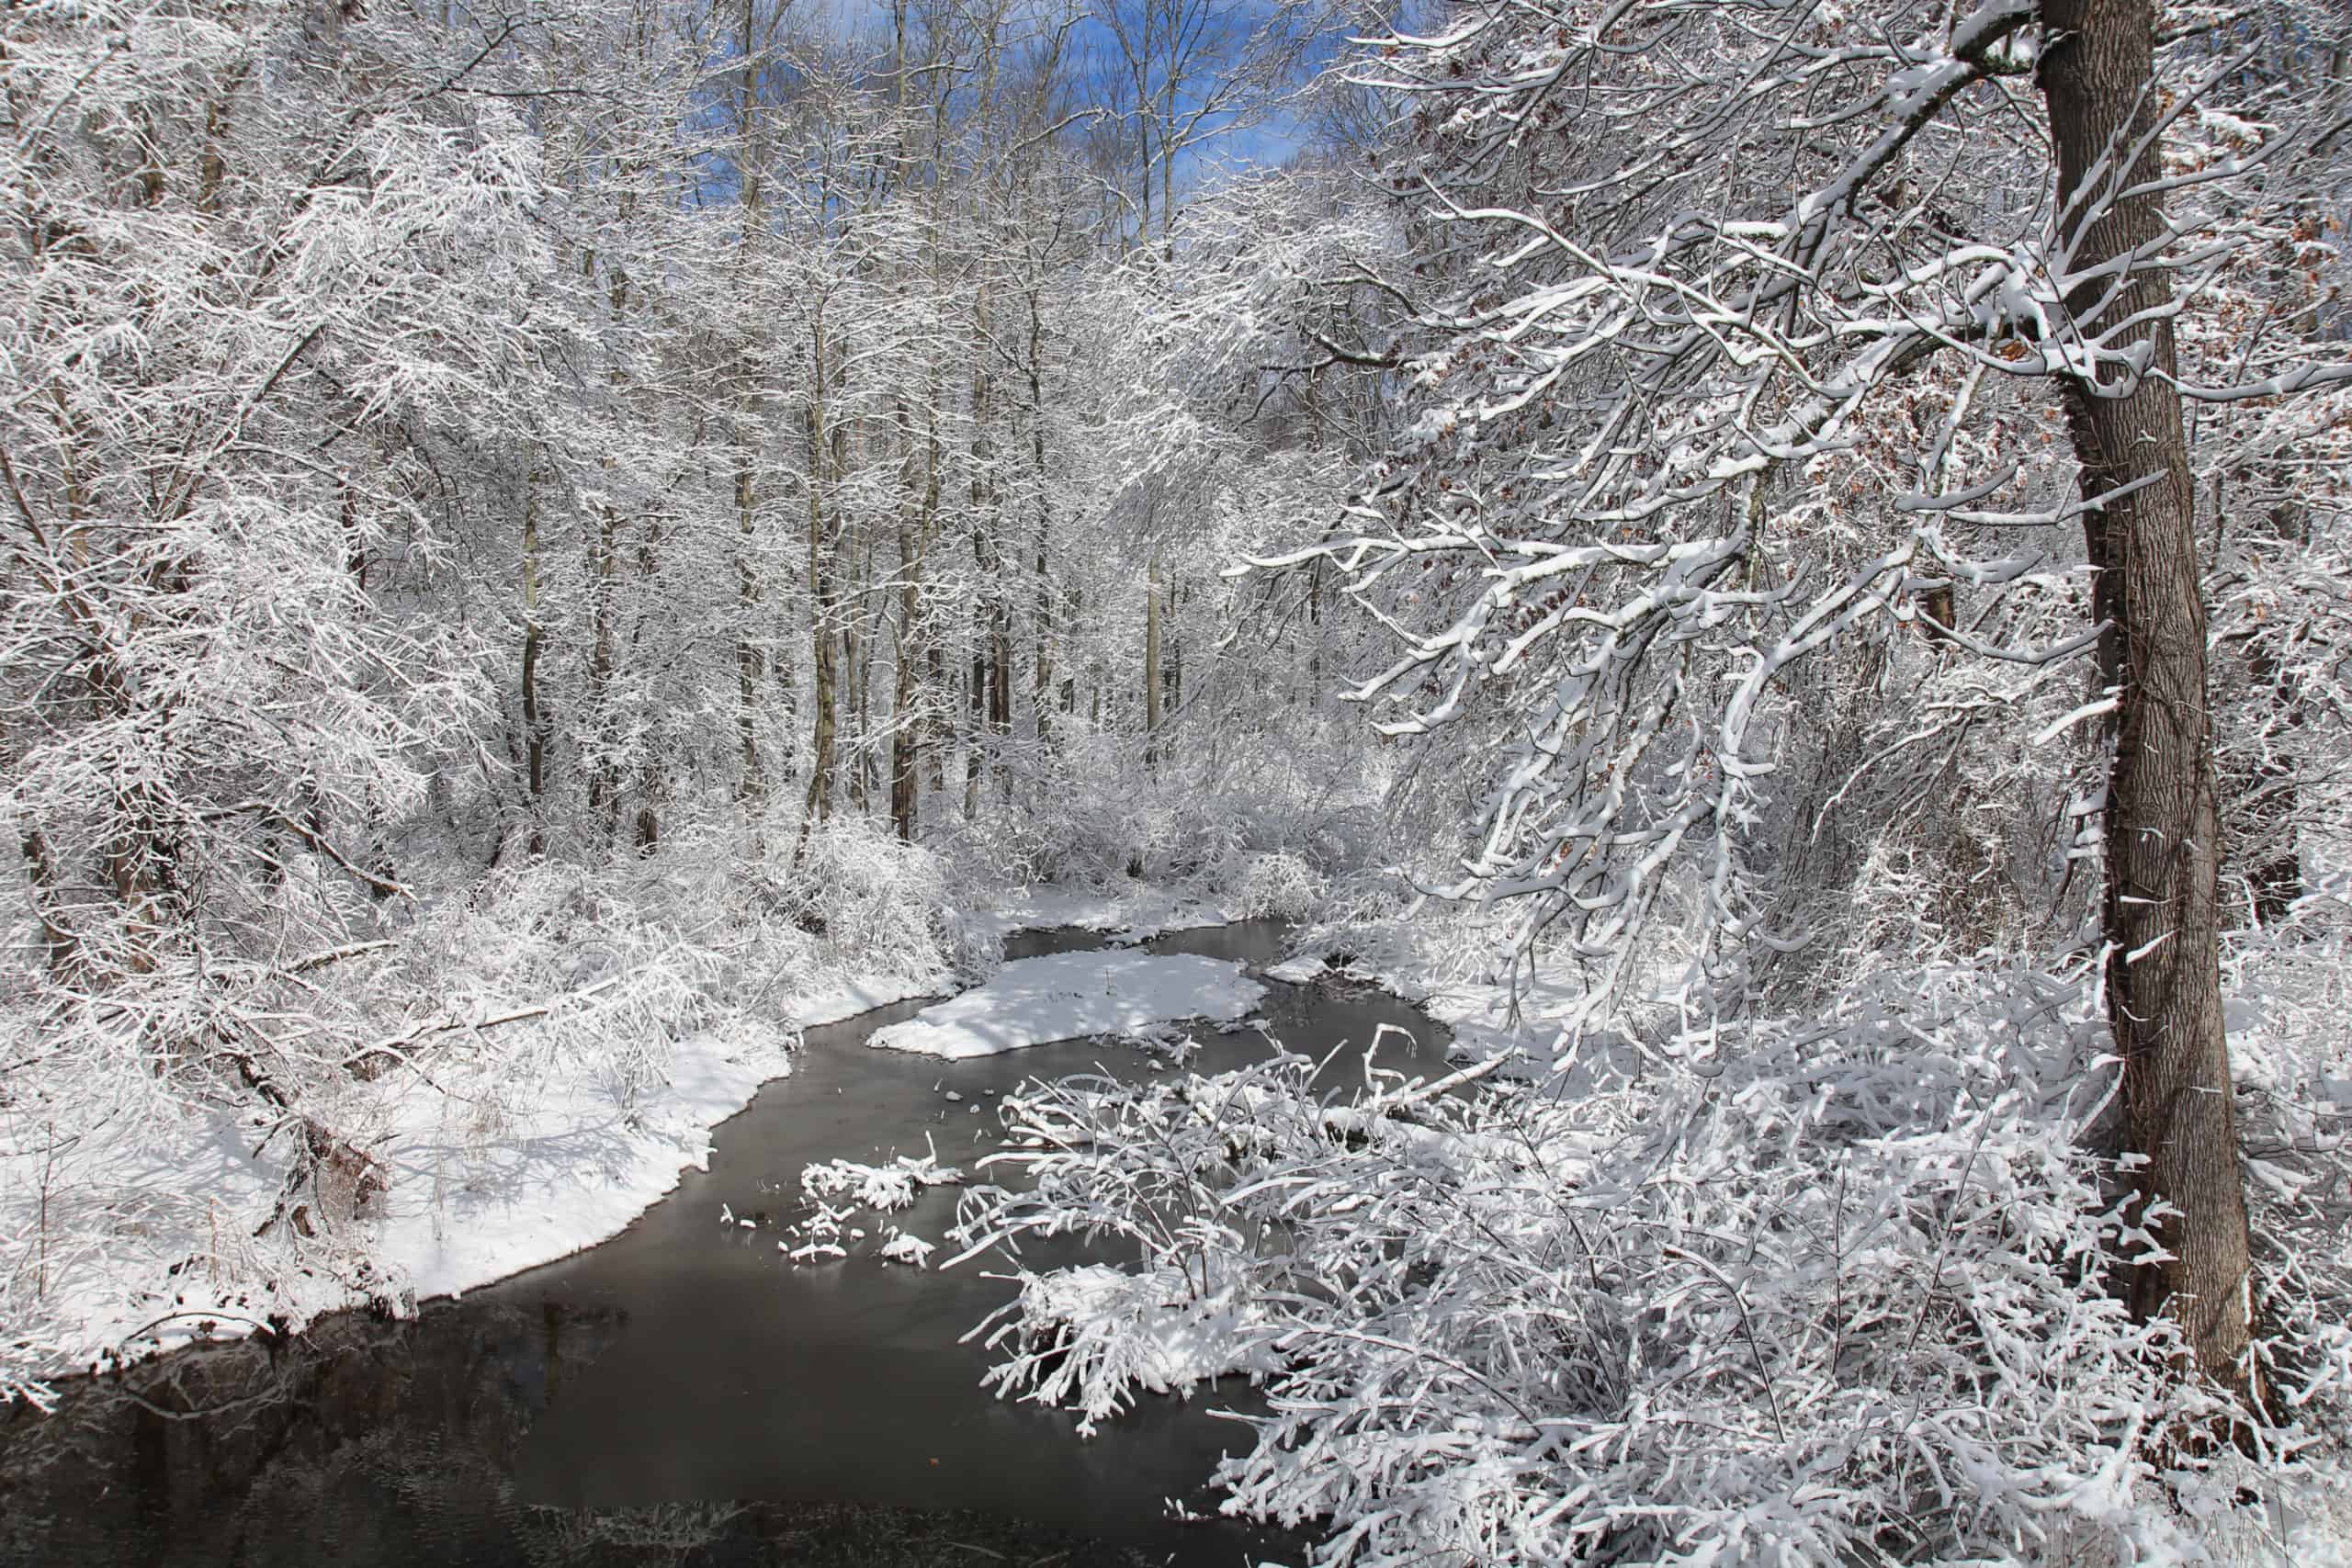 French Creek on a snowy day in 2017; the dark water contrasts with the wet snow stuck to trees and branches